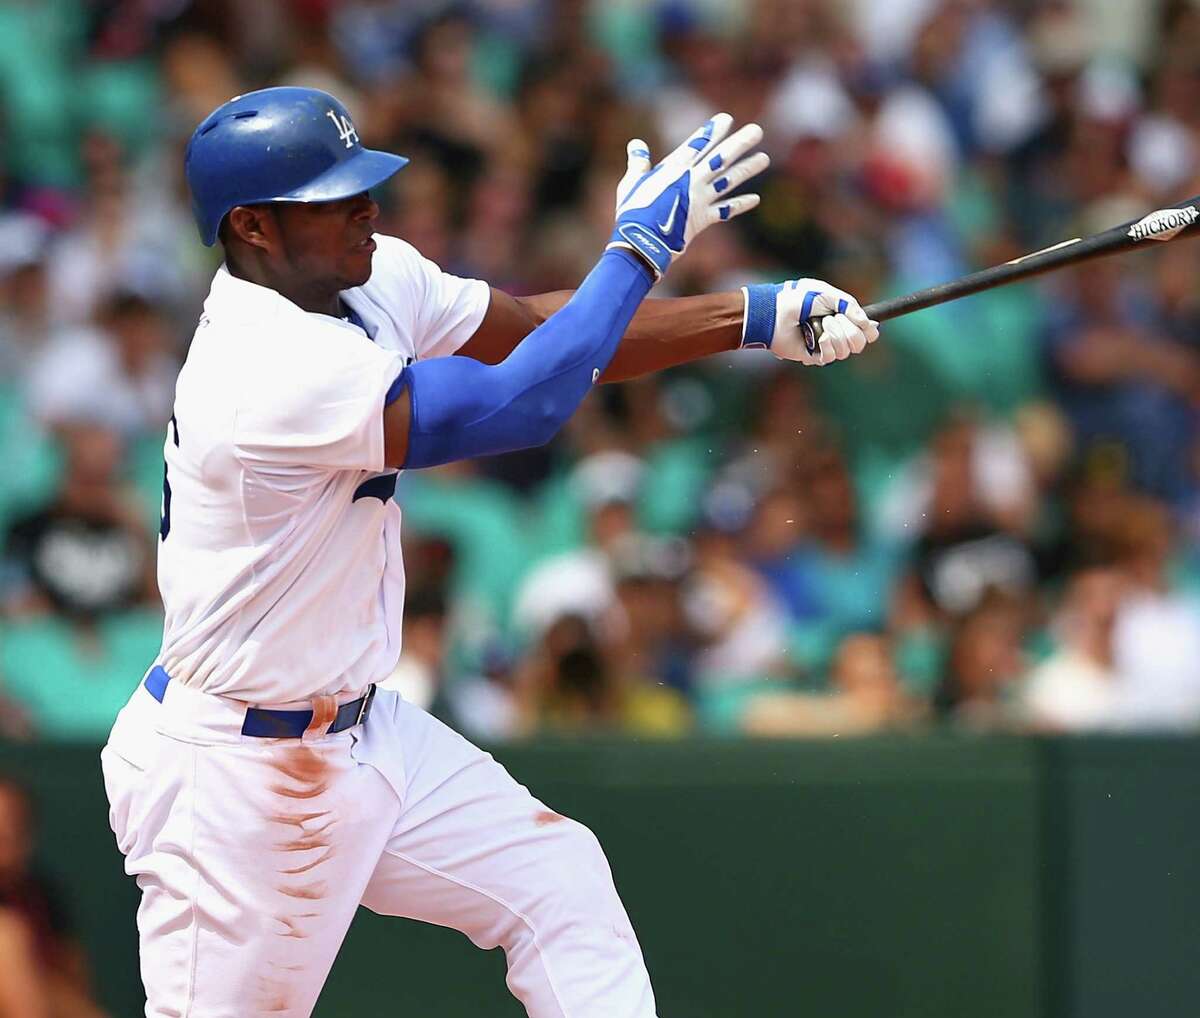 Yasiel Puig debuted with 19 home runs in 2013. Despite his talent, his mental mistakes have irritated Dodgers manager Don Mattingly.